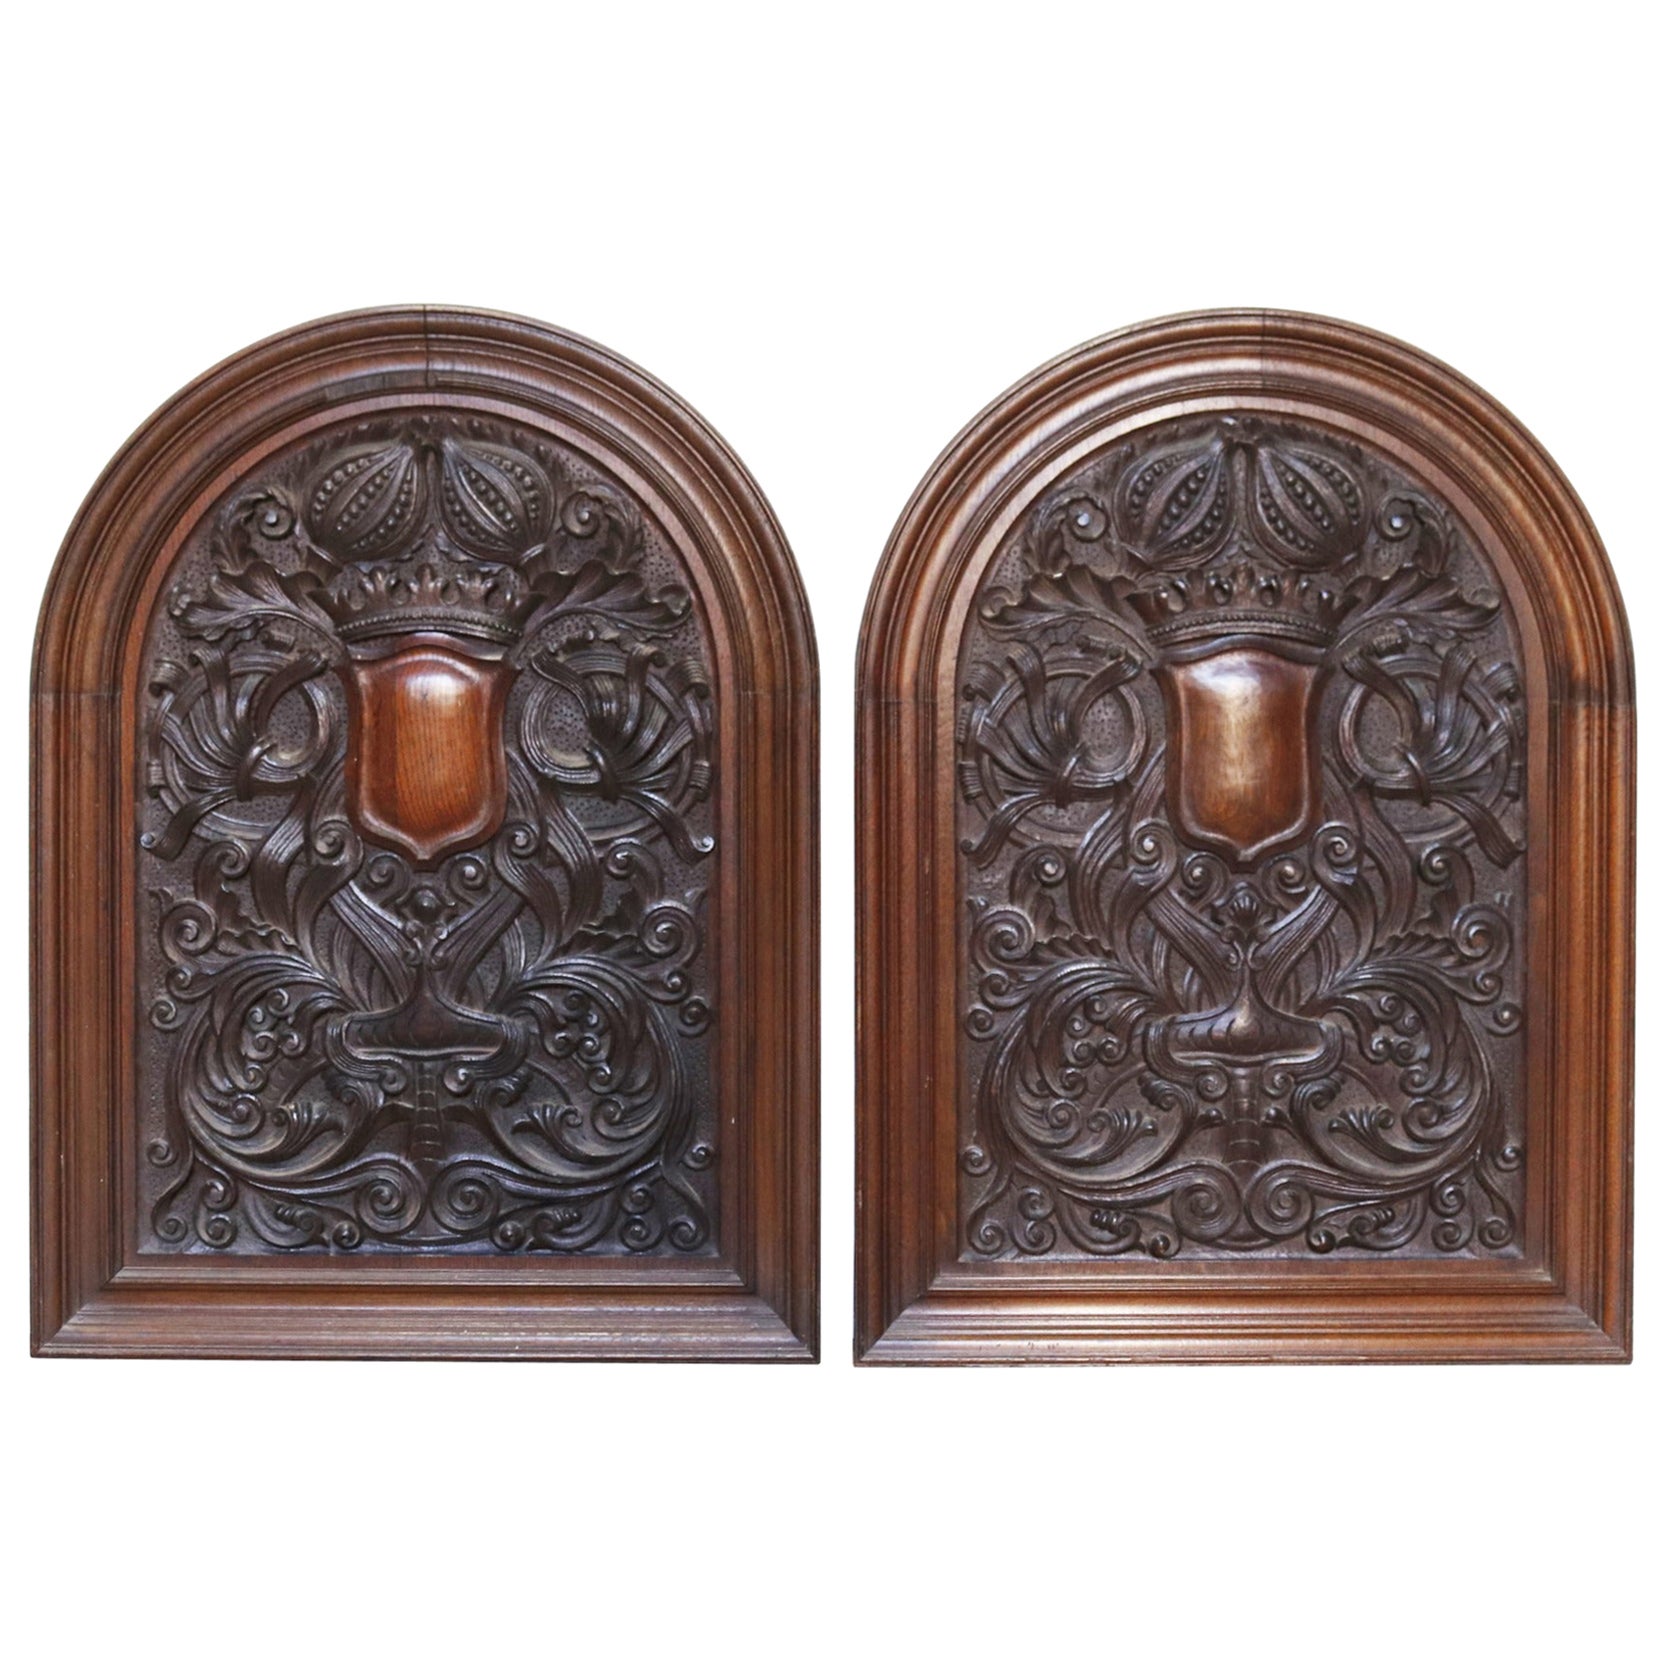 Two Tudor Style Antique Carved Oak Wall Panels